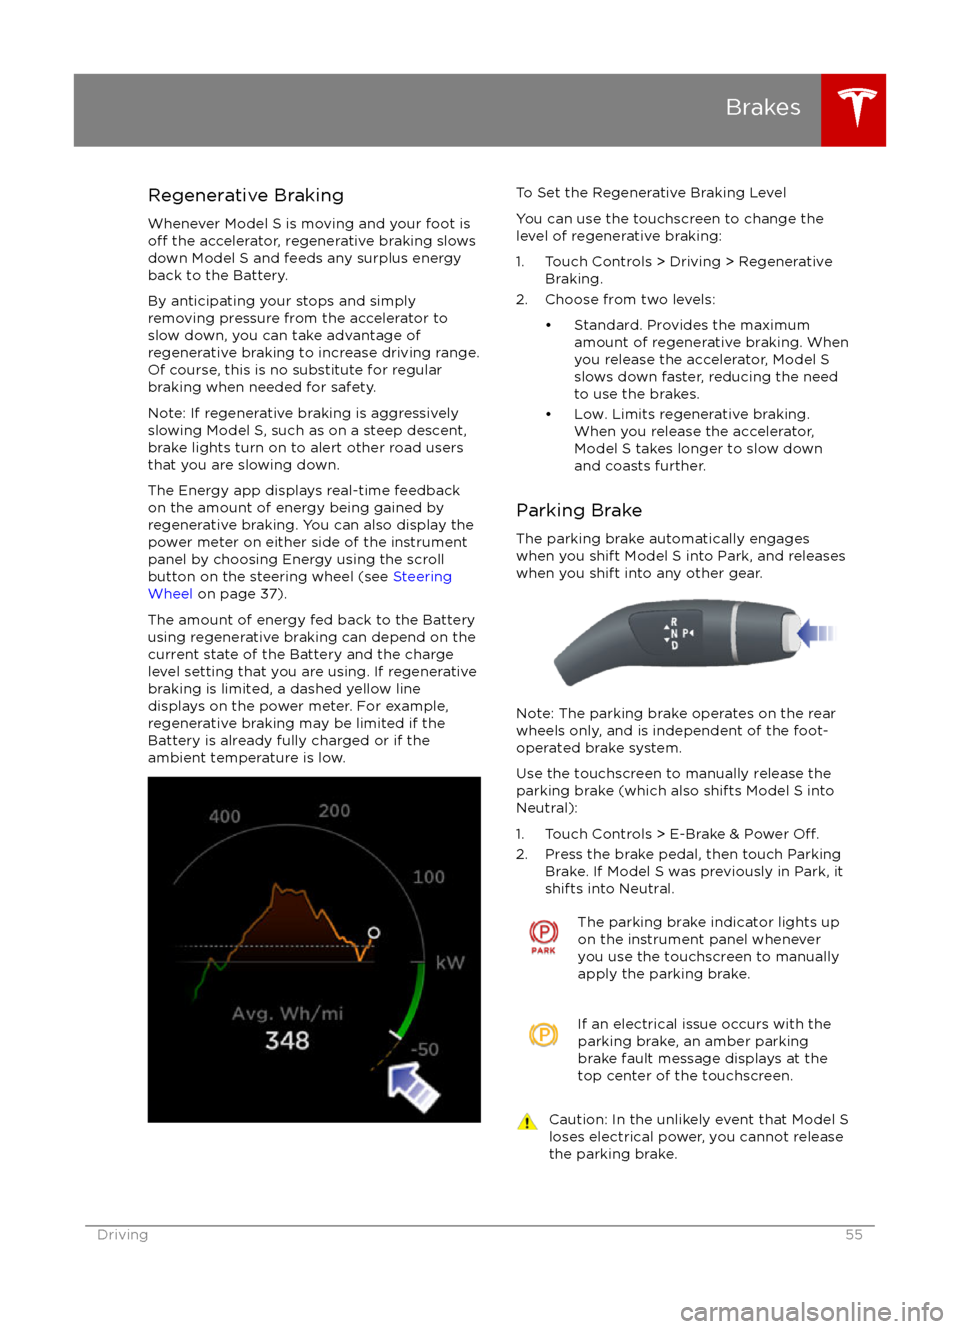 TESLA MODEL S 2016  Owners Manual Regenerative Braking
Whenever Model S is moving and your foot is
off the accelerator, regenerative braking slows
down Model S and feeds any surplus energy
back to the Battery.
By anticipating your sto